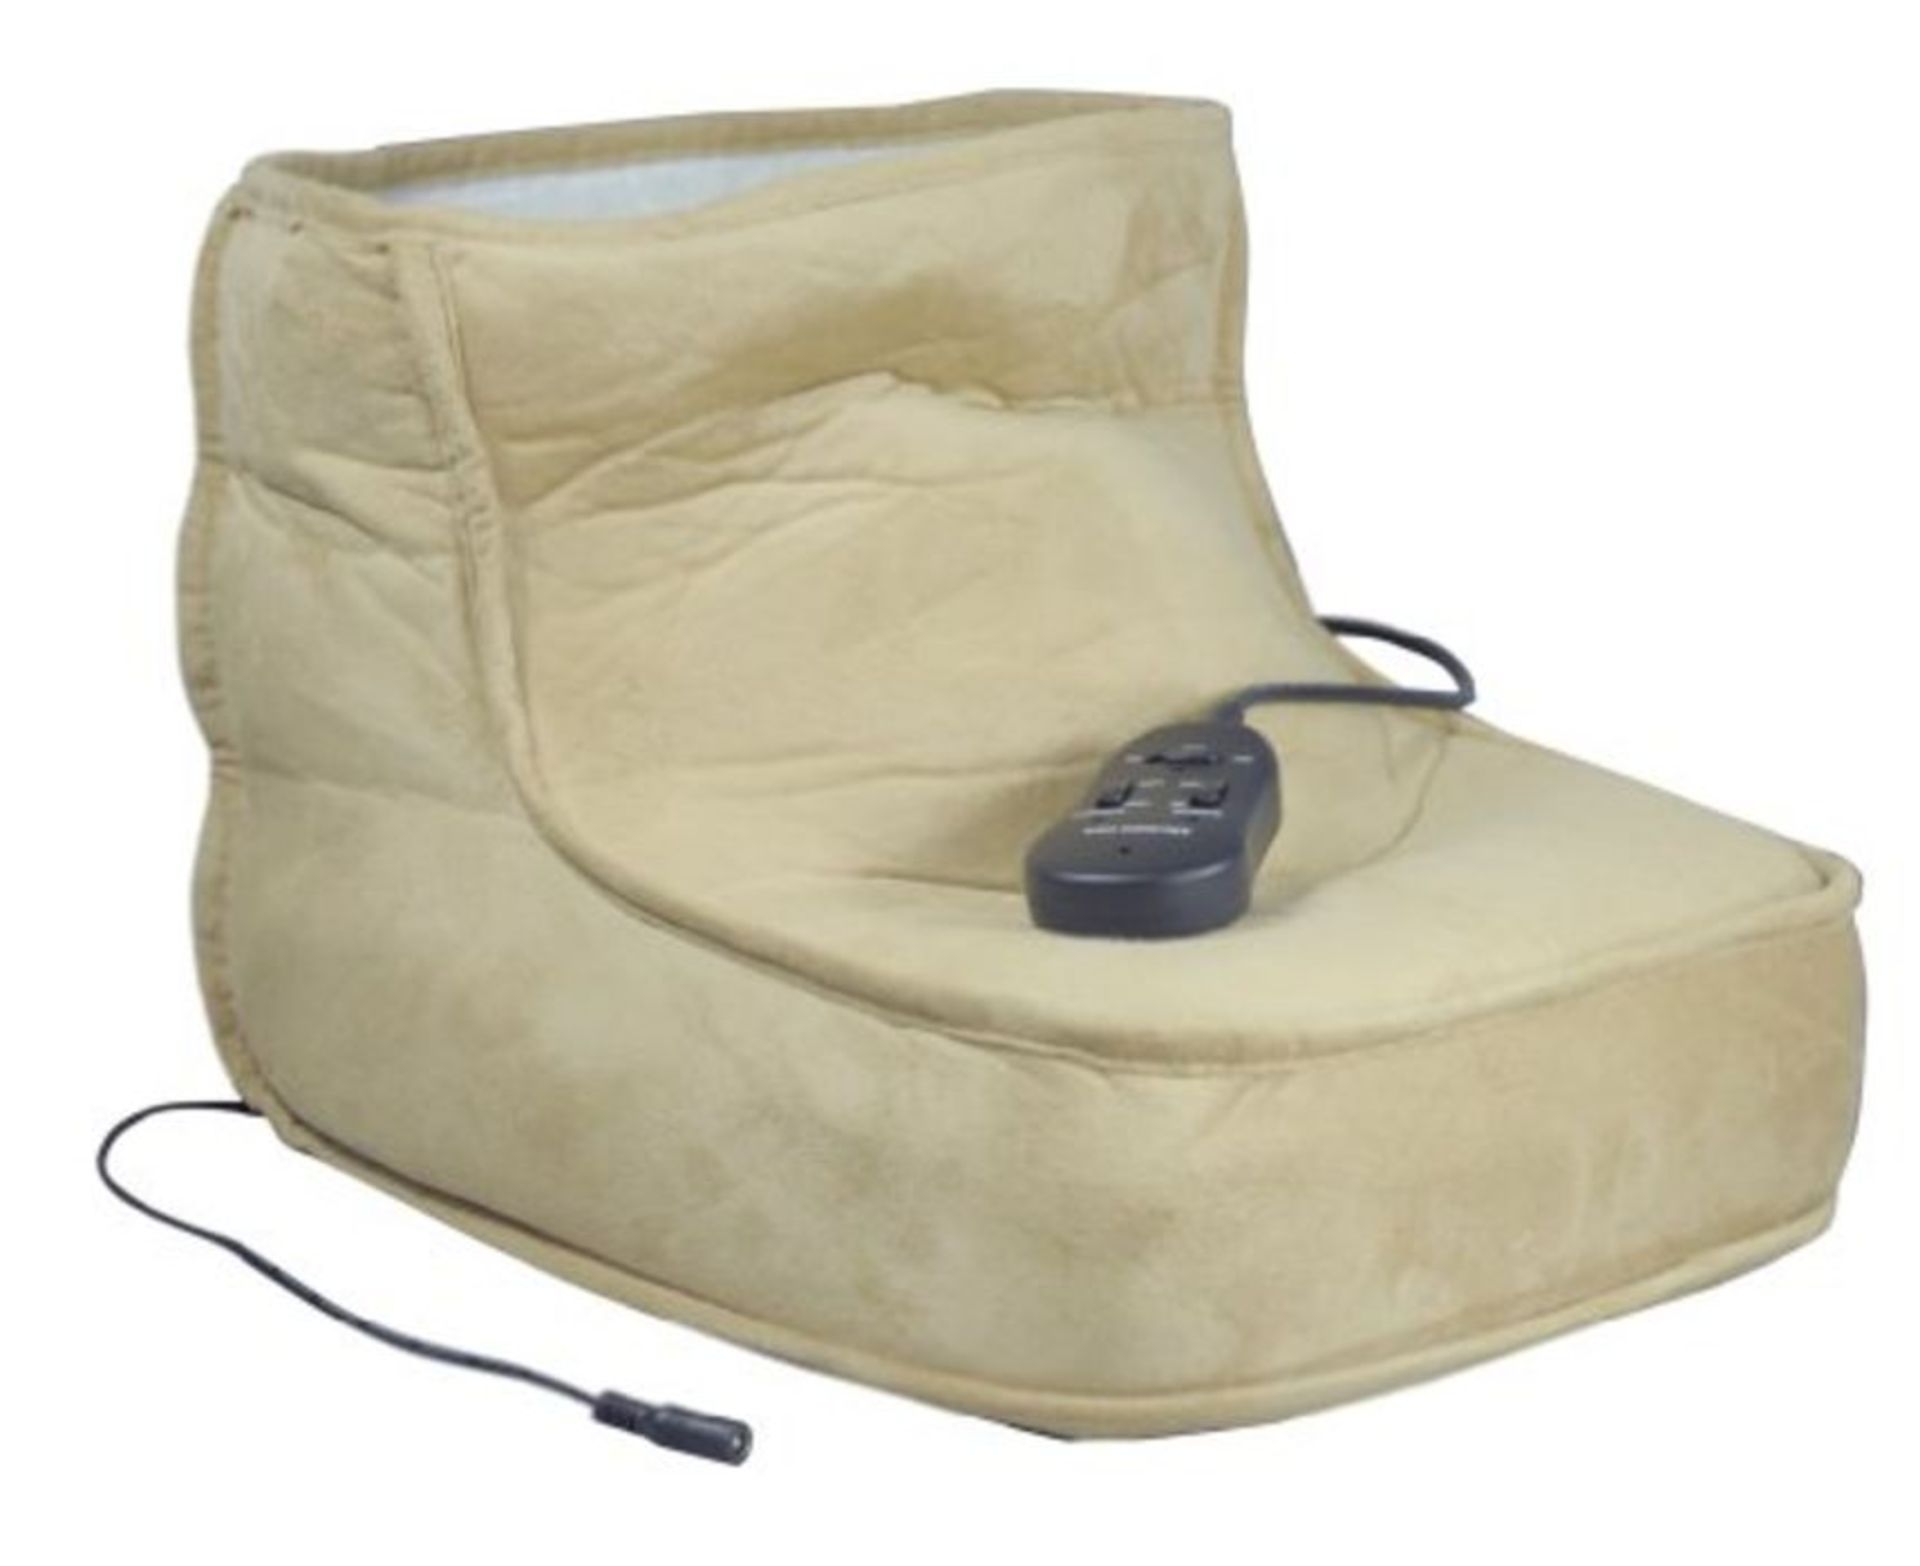 Aidapt Soft Relaxing Dual Speed Electric Foot Massage & Heated Foot Warmer Boot (Brown